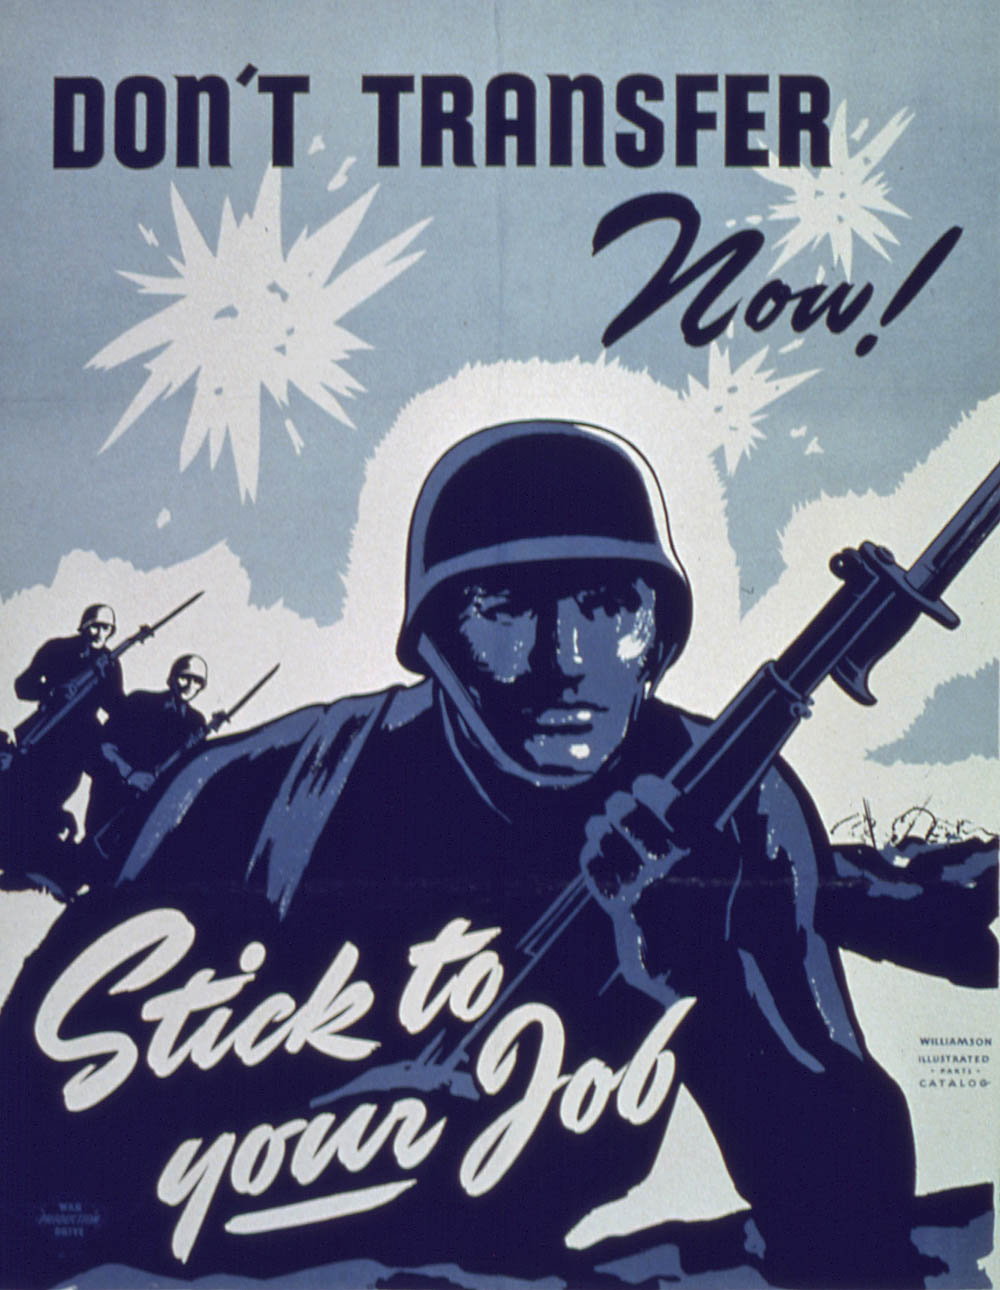 Don't Transfer Now! Stick to Your Job! -- World War II Poster. (Office for Emergency Management, Office of War Information.)